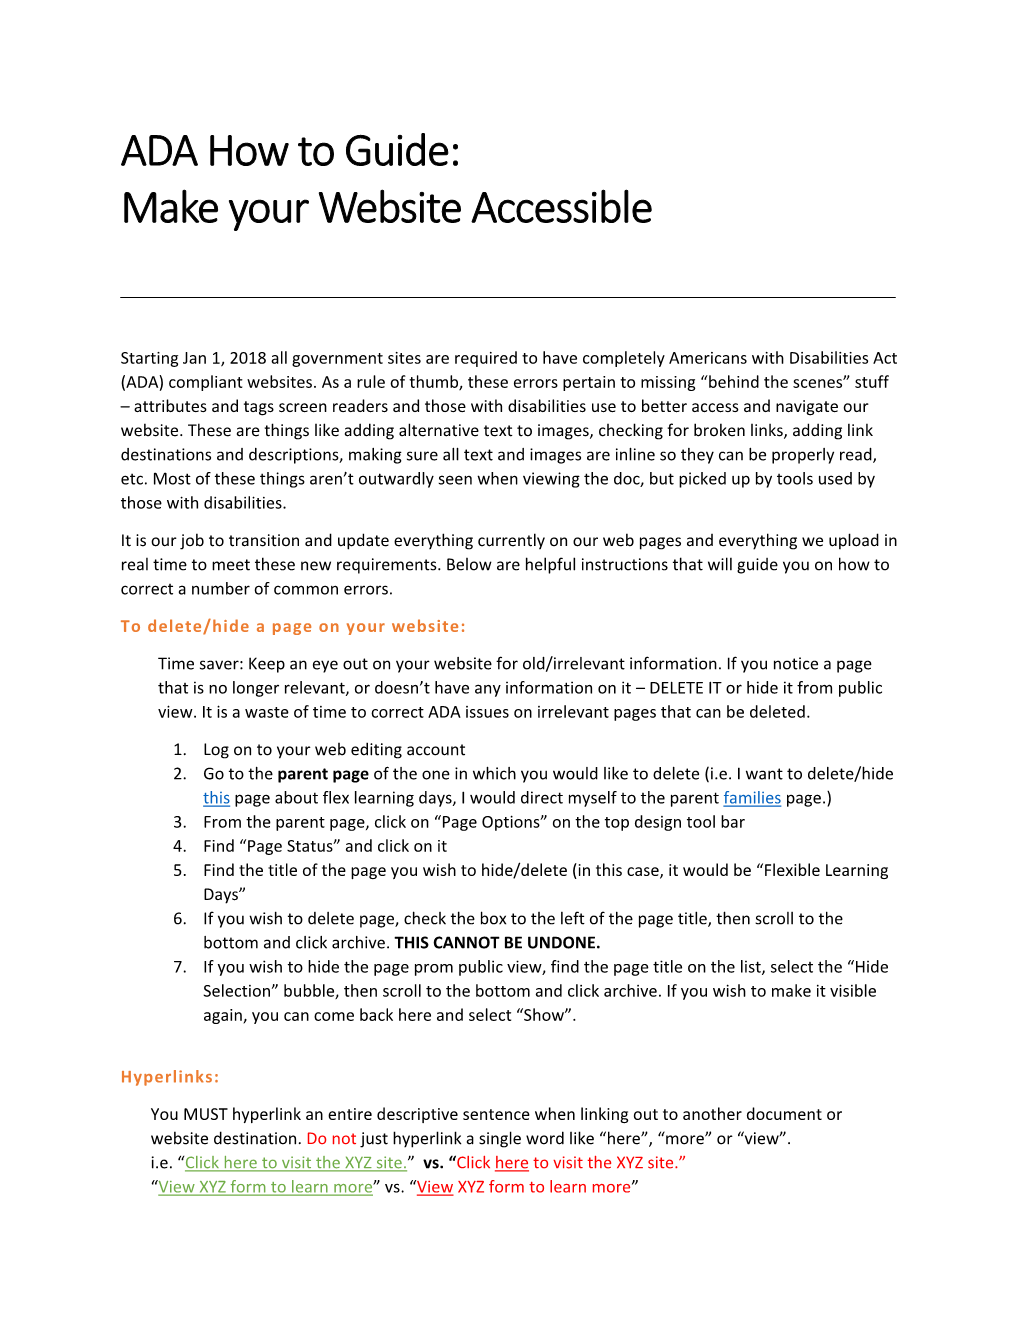 ADA How to Guide: Make Your Website Accessible